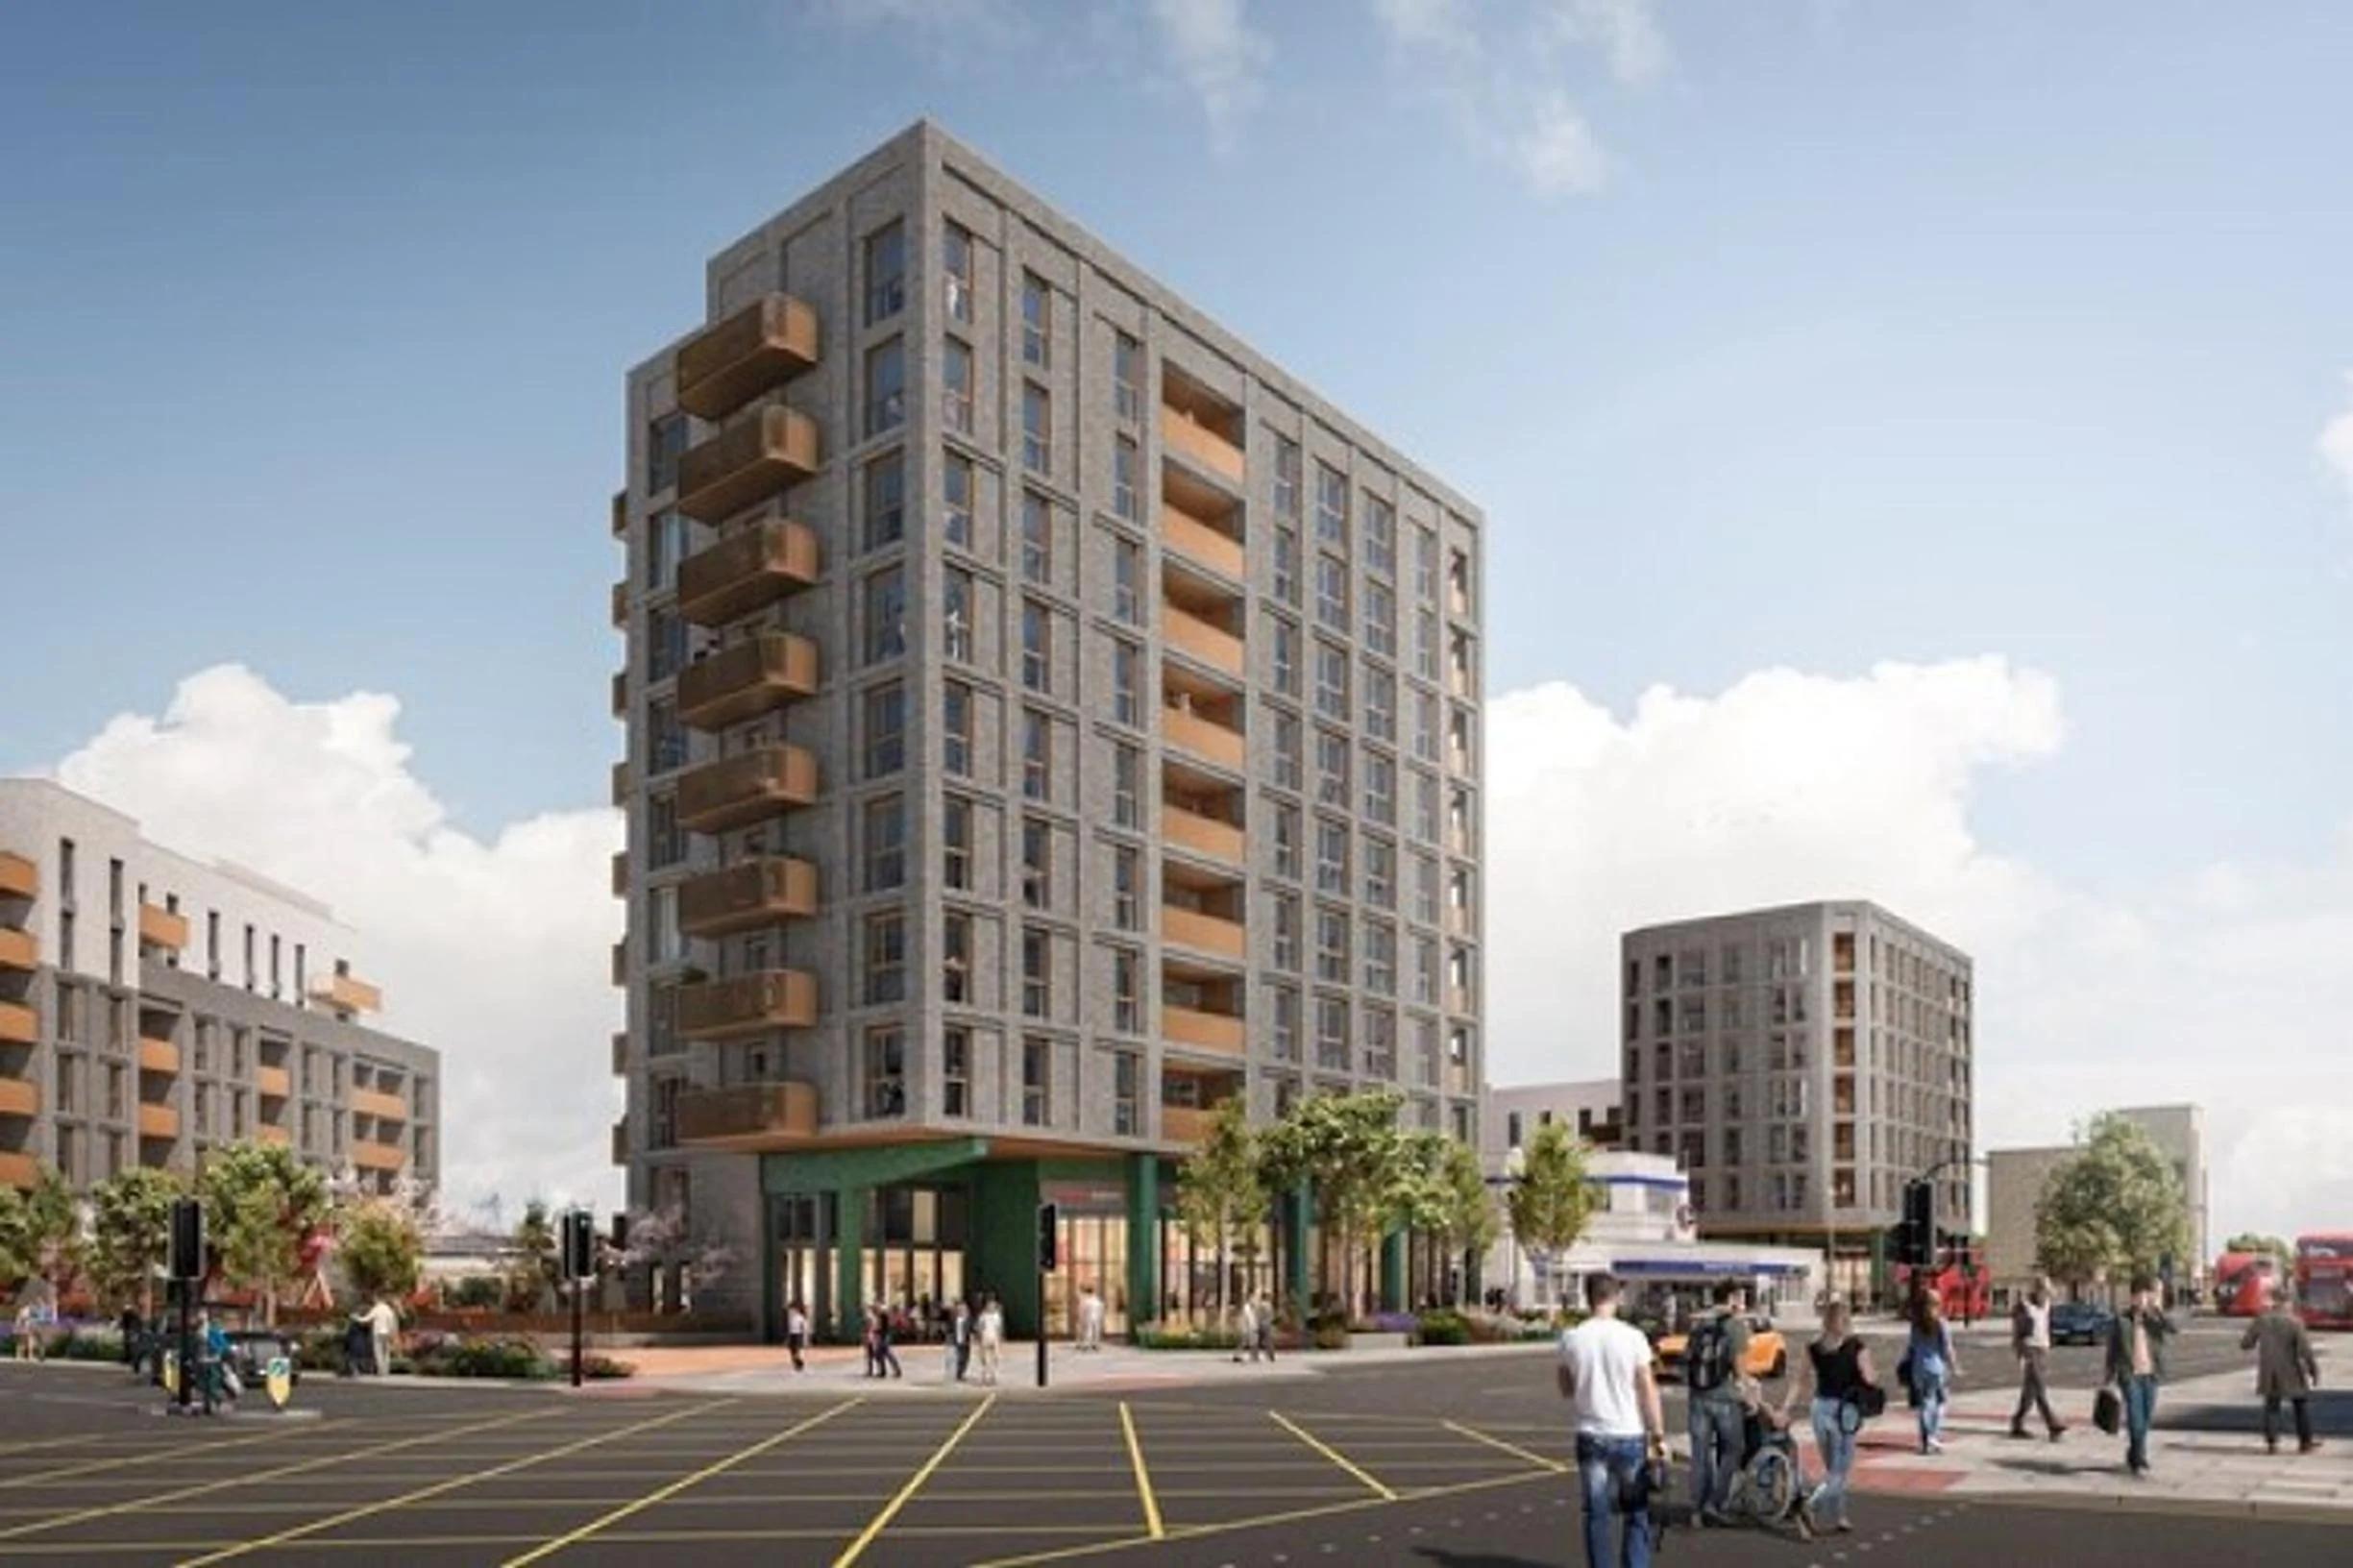 A2Dominion is TfL`s development partner for the site next to Hounslow West Tube station. Image: A2Dominion